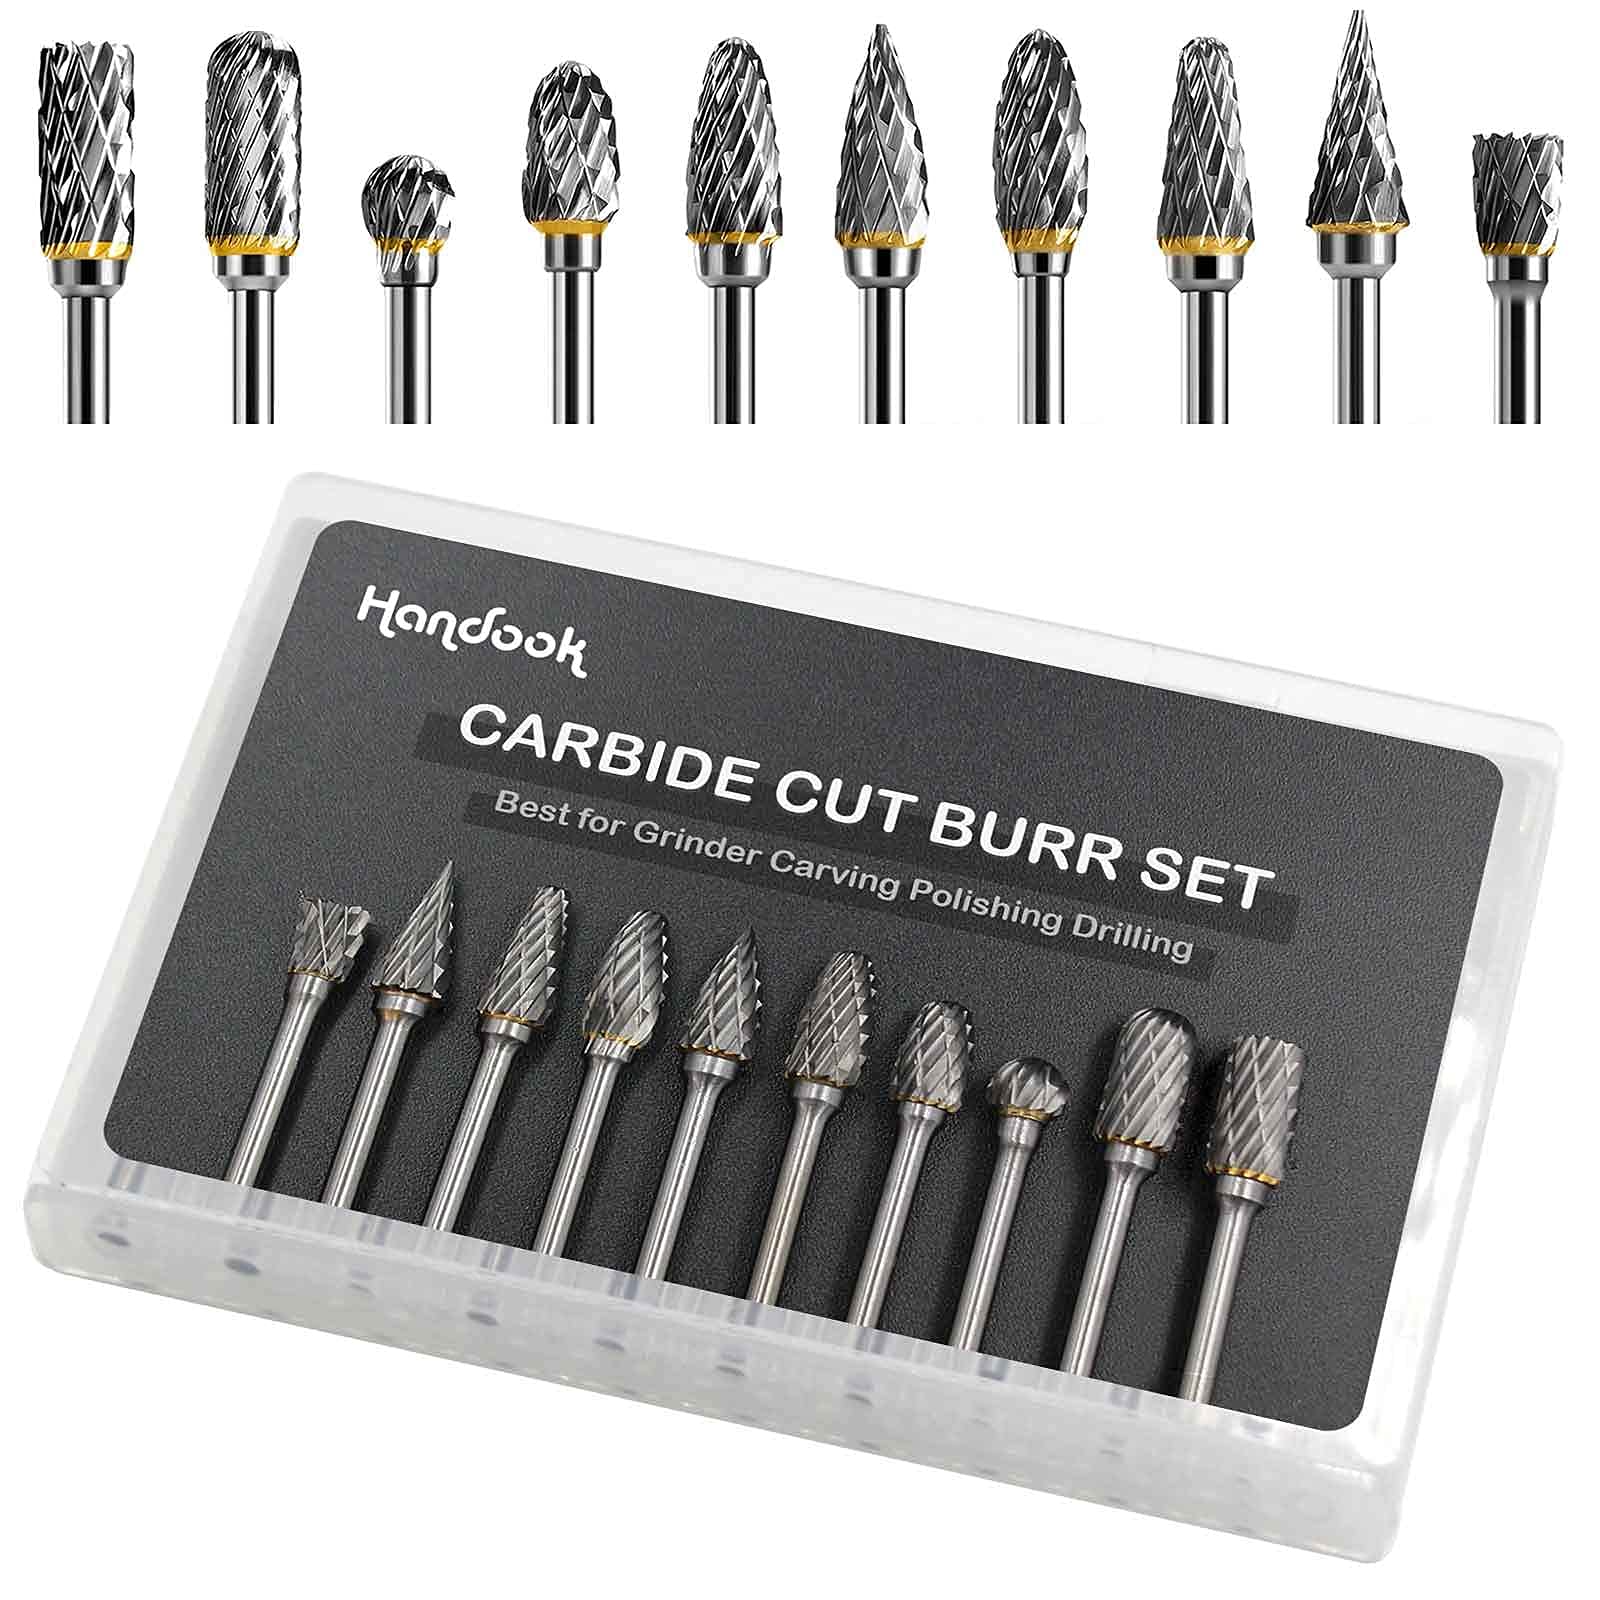 Handook Tungsten Carbide Double Cut Burr Set, with 1/8" Shank 1/4" Grinding Head Length Tungsten Steel for Grinder, DIY Wood-Working Carving, Soft Metal Polishing, Engraving, Drilling(10pcs)